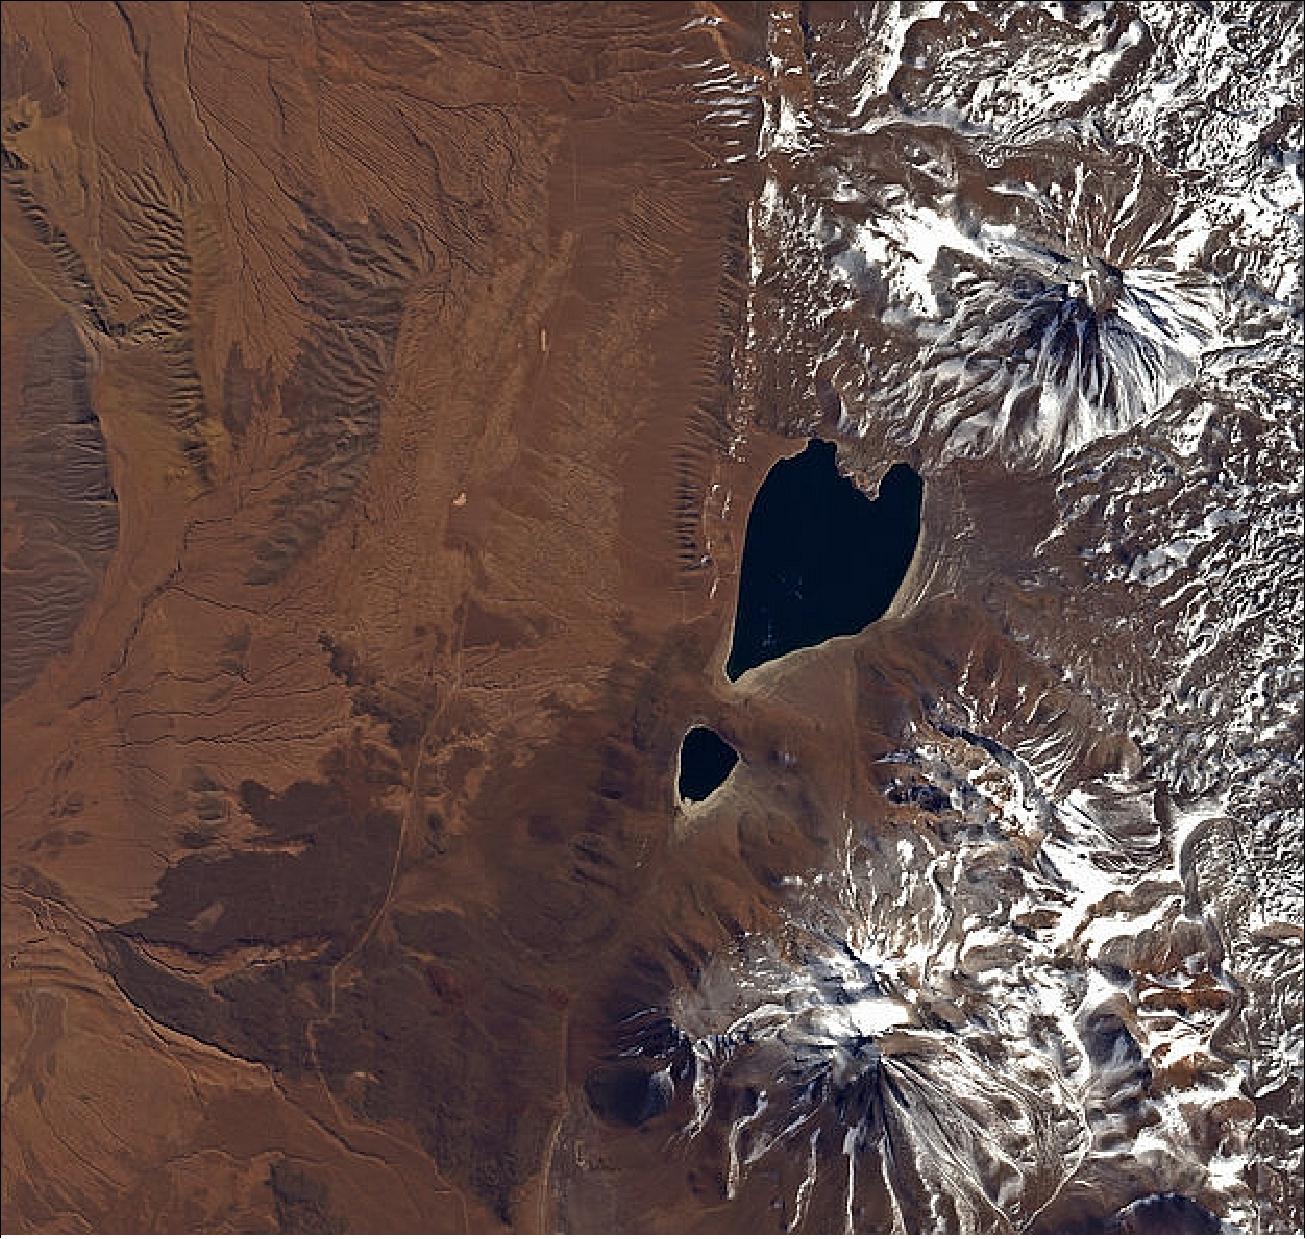 Figure 21: ALOS image of the heart of the Atacama Desert in Chile acquired on May 30, 2010 (image credit: ESA, JAXA)